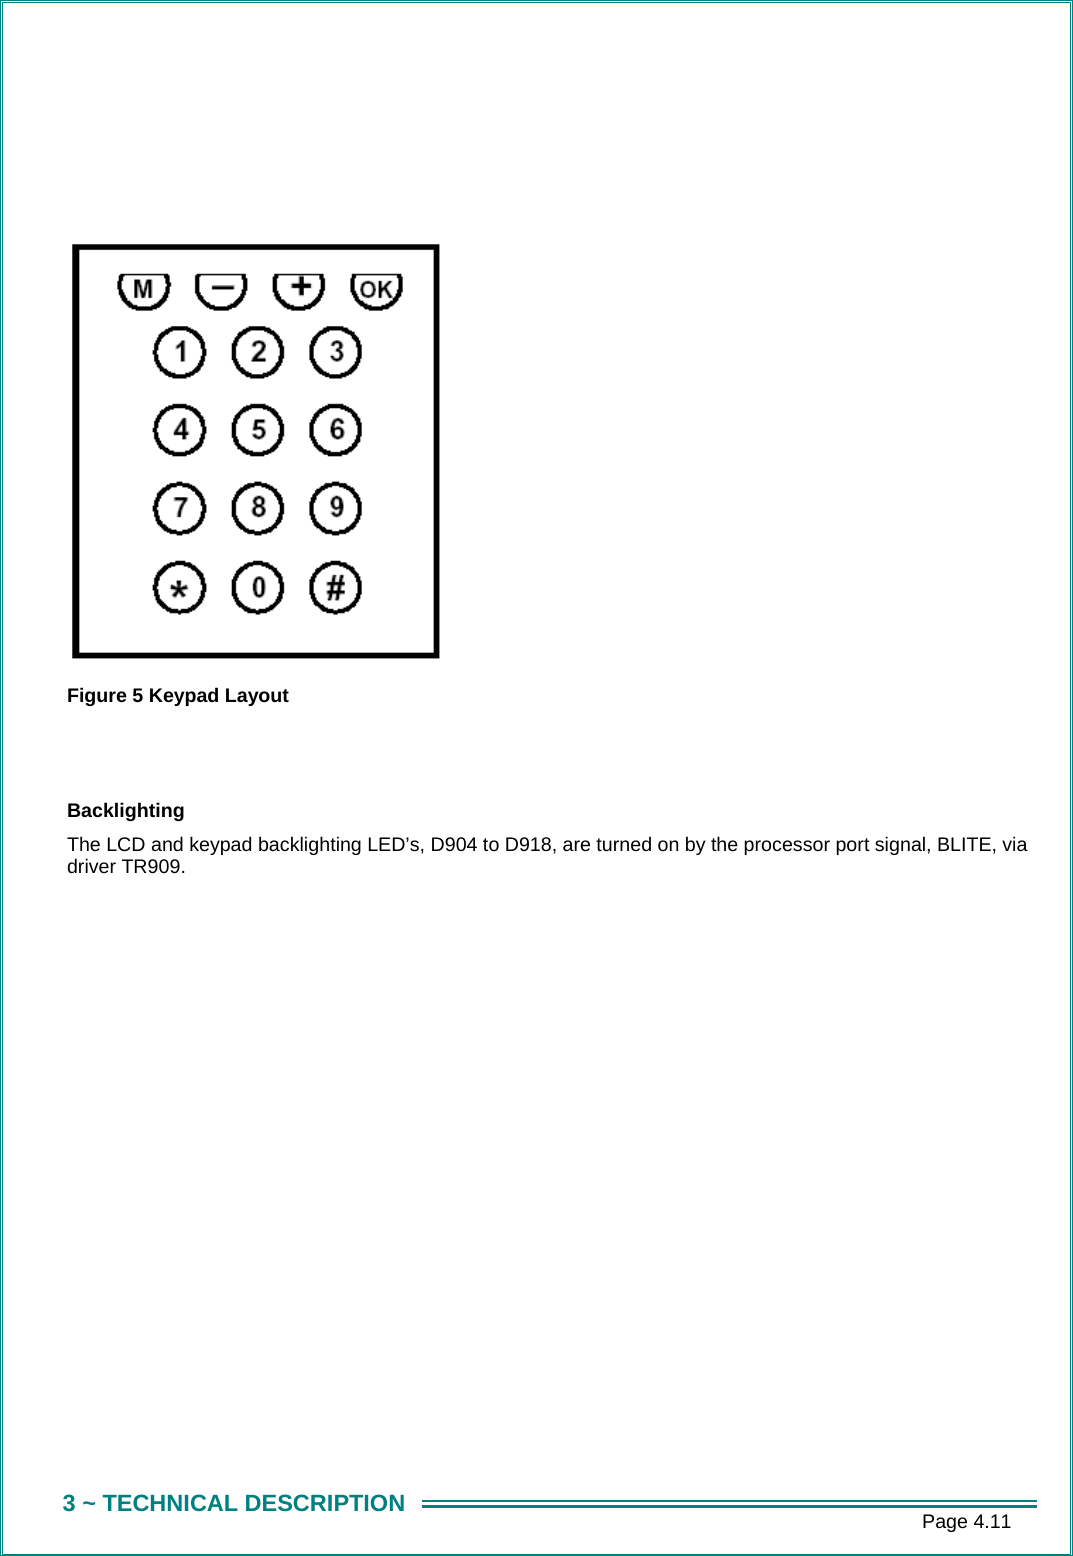      Page 4.11 3 ~ TECHNICAL DESCRIPTION      Figure 5 Keypad Layout   Backlighting The LCD and keypad backlighting LED’s, D904 to D918, are turned on by the processor port signal, BLITE, via driver TR909.     